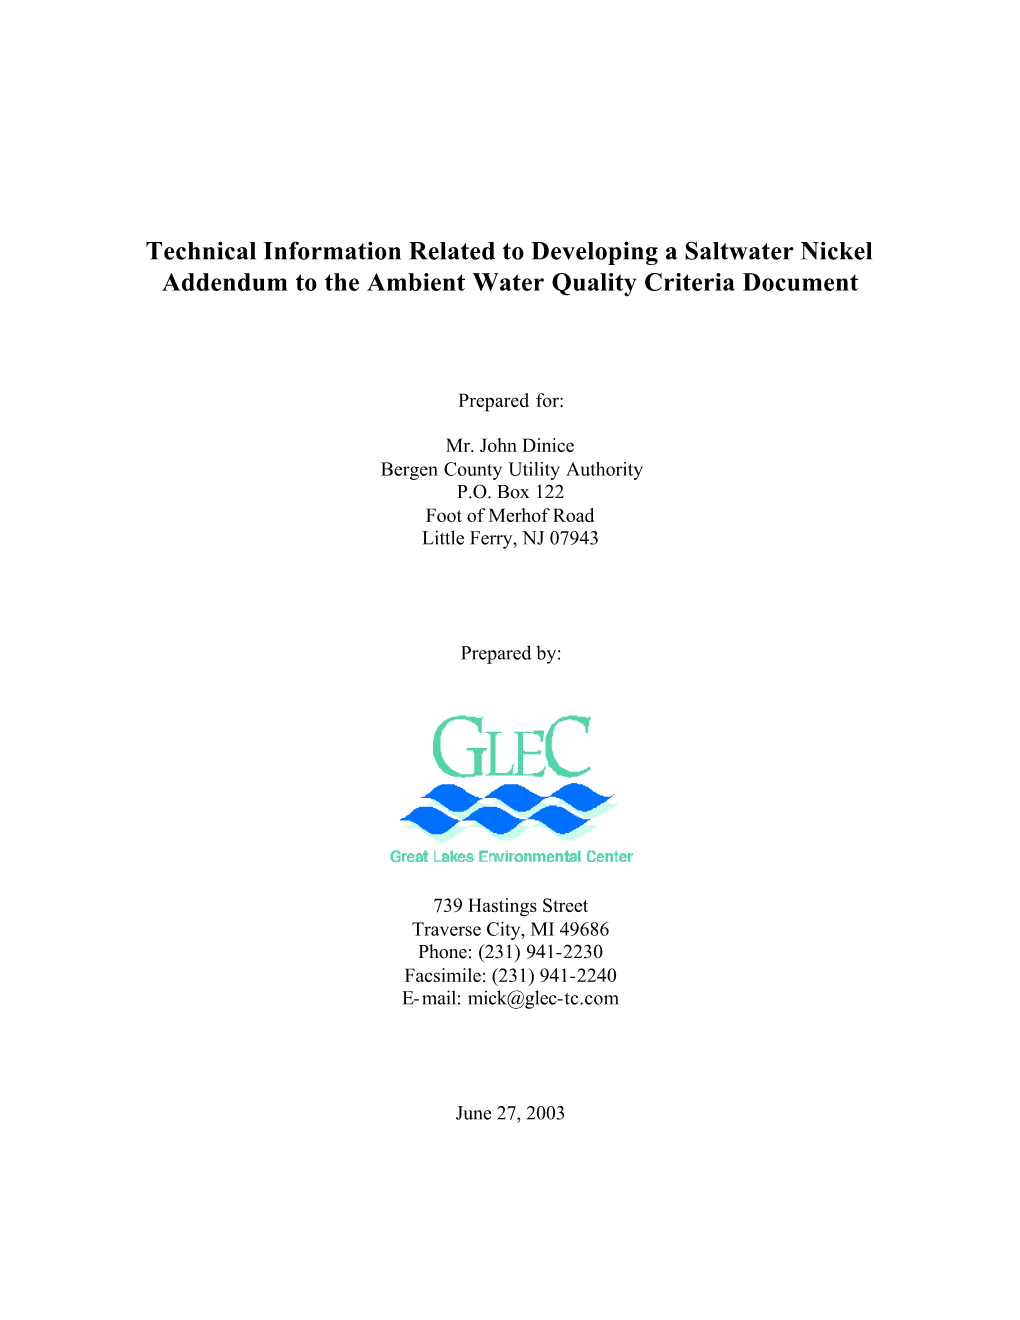 Technical Information Related to Developing a Saltwater Nickel Addendum to the Ambient Water Quality Criteria Document